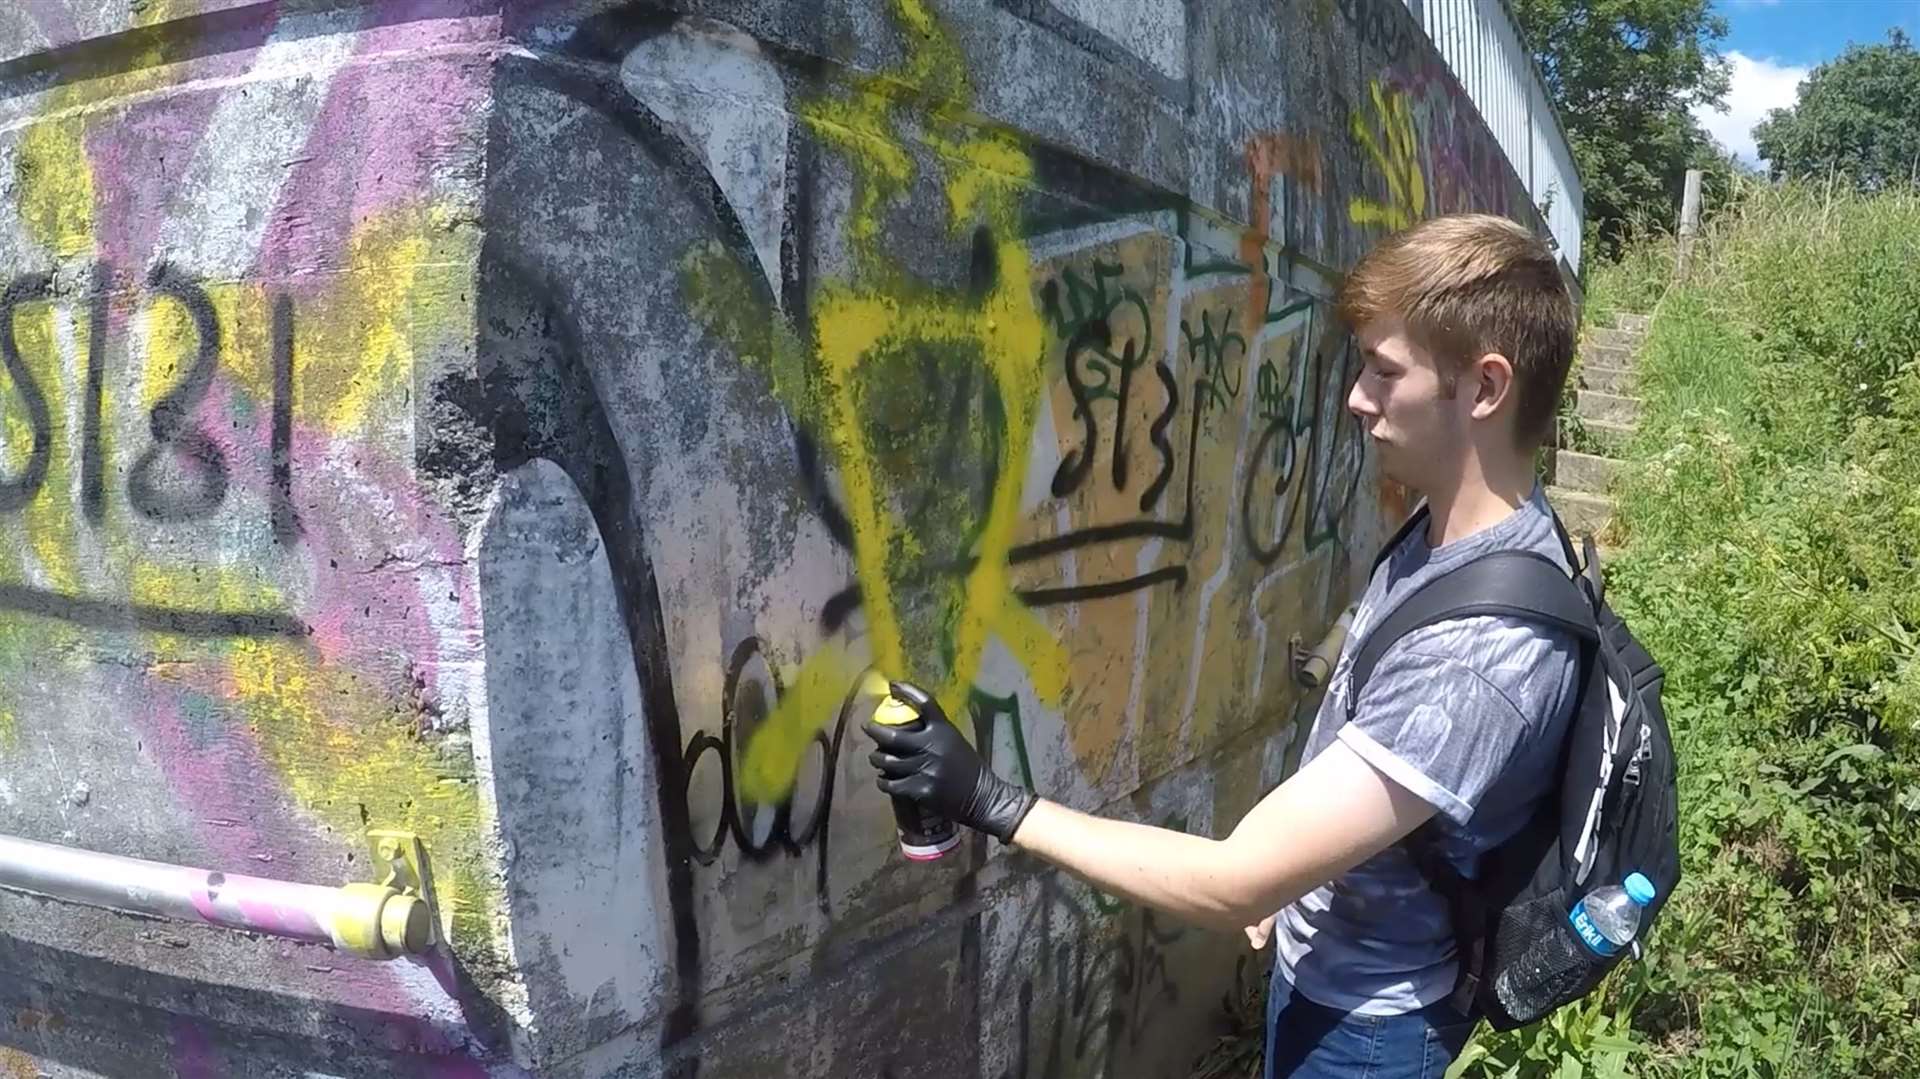 Ben Hannam, pictured spray painting graffiti, was jailed for four years after becoming the first officer to be convicted of NA membership (Met Police/PA)